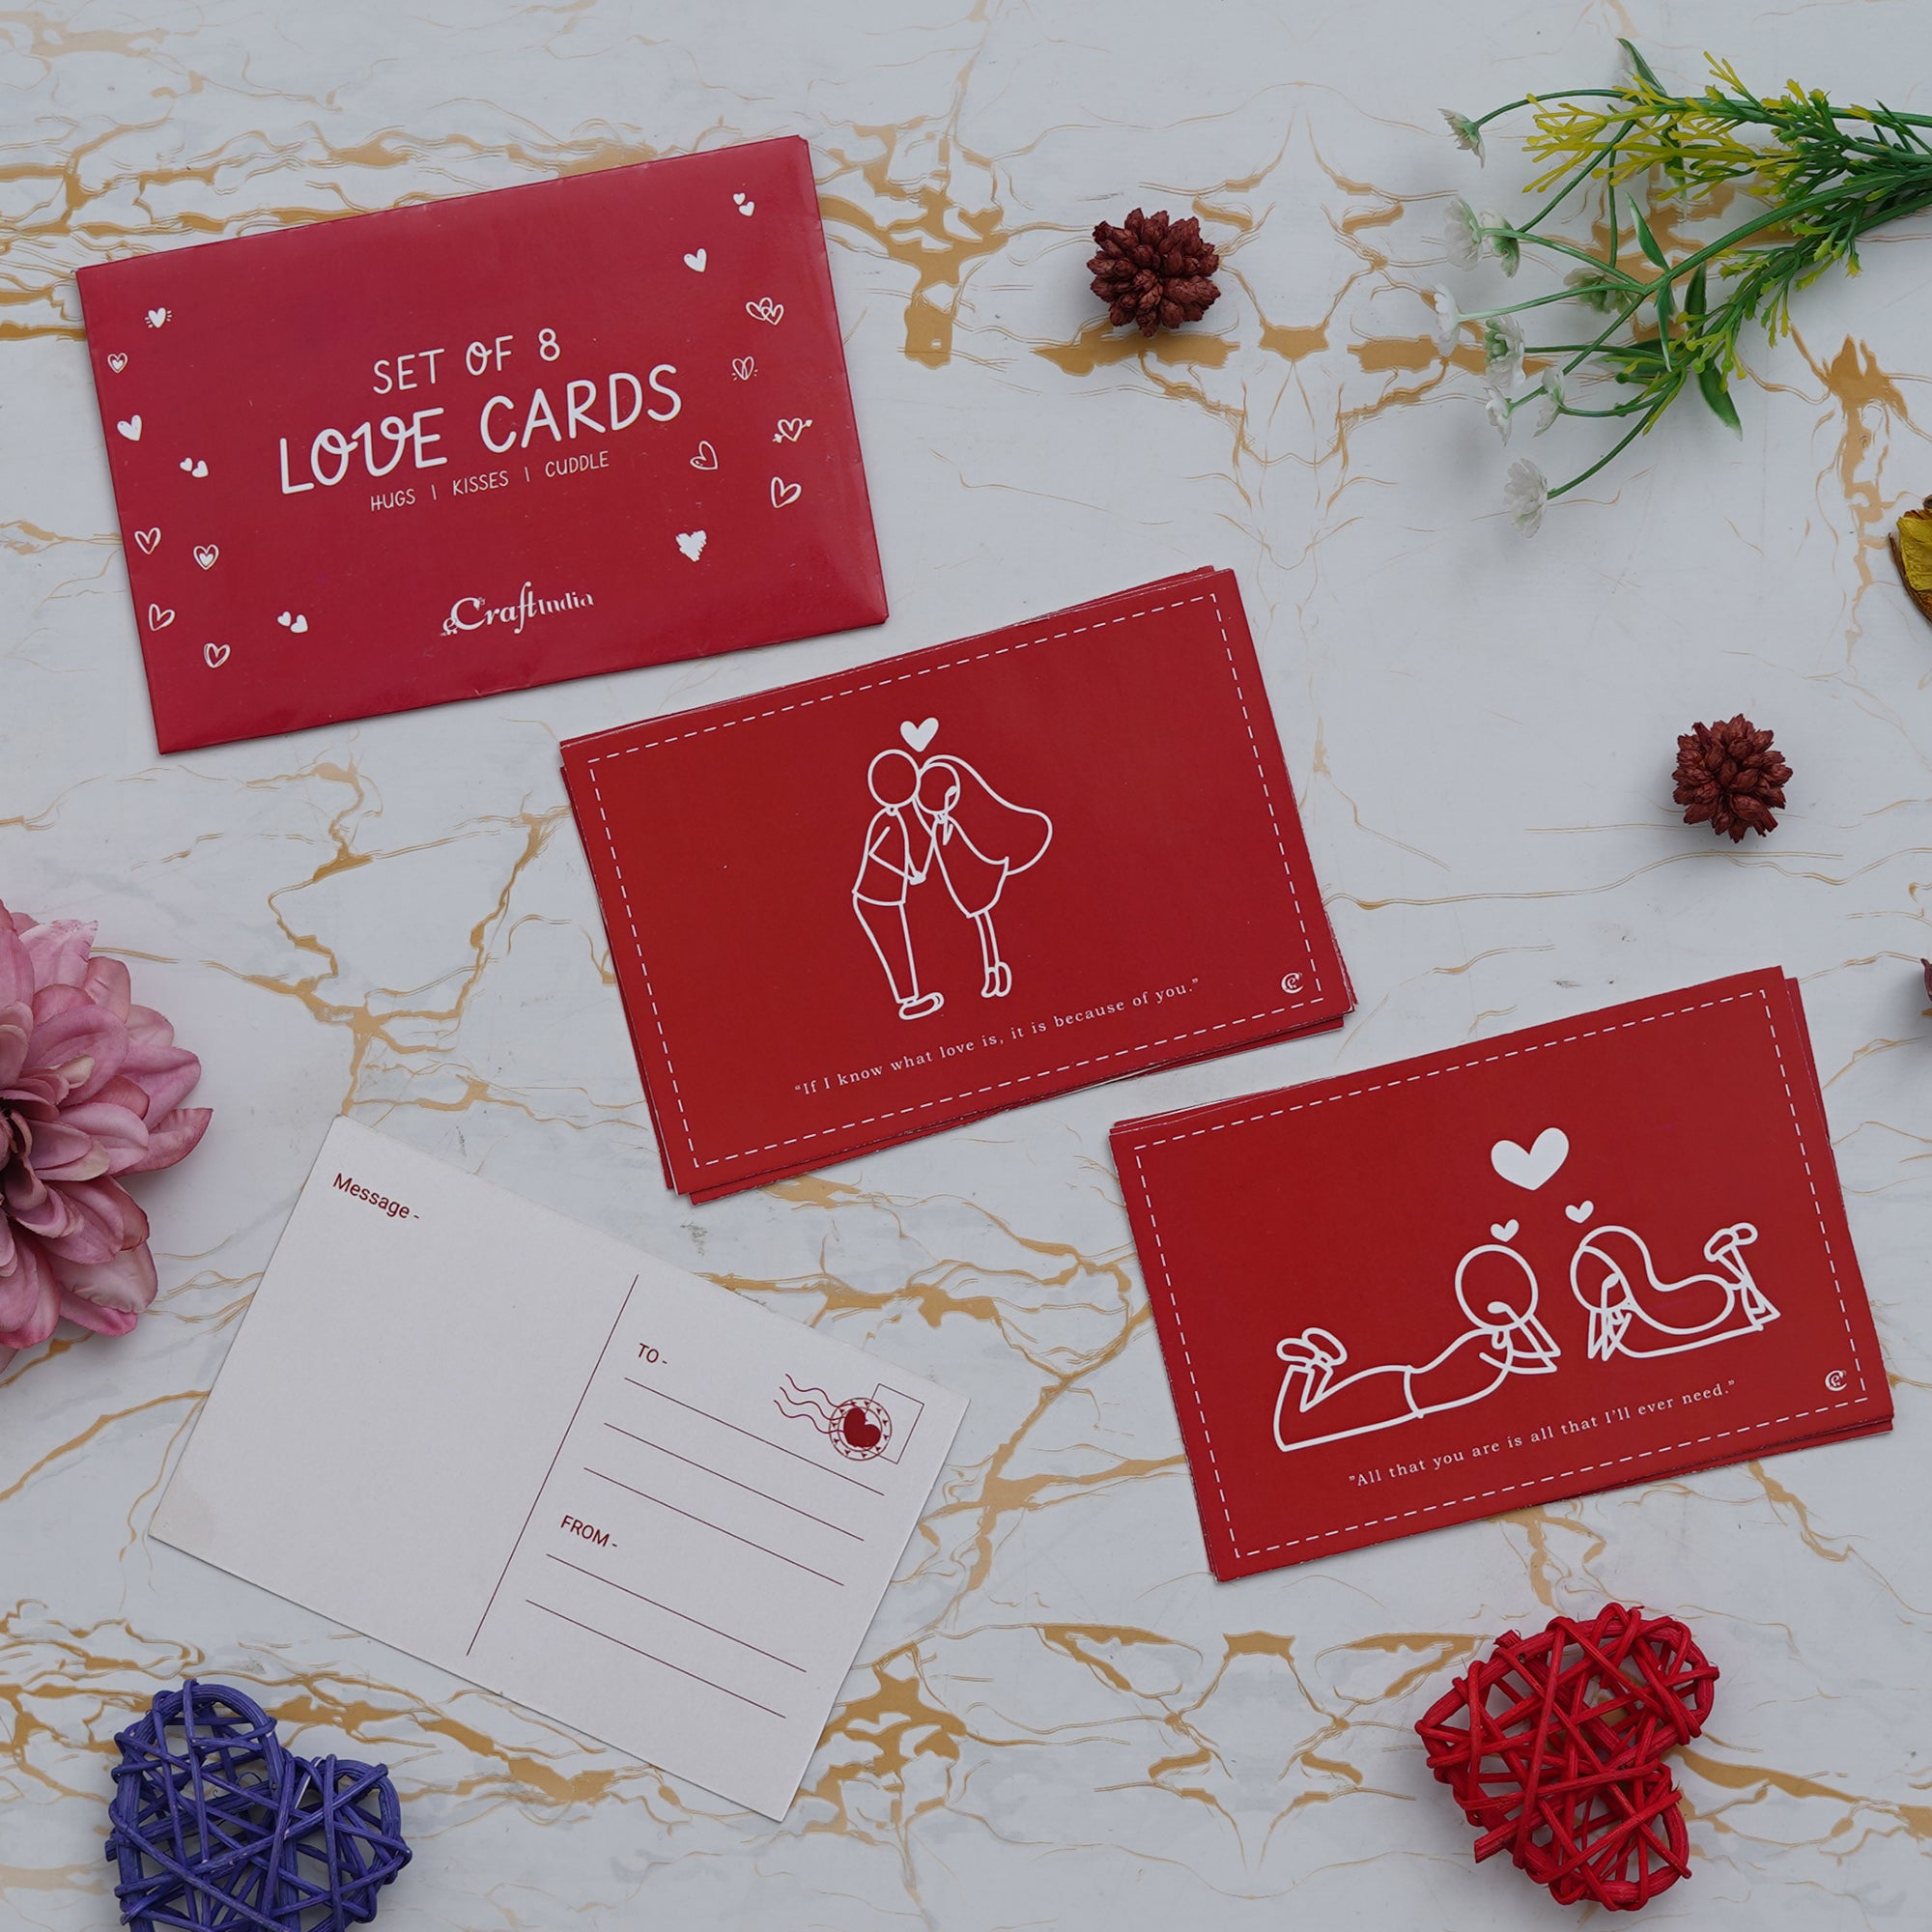 Valentine Combo of Pack of 8 Love Gift Cards, Golden Rose Gift Set, Hands Showcasing Red Heart Gift Set 1